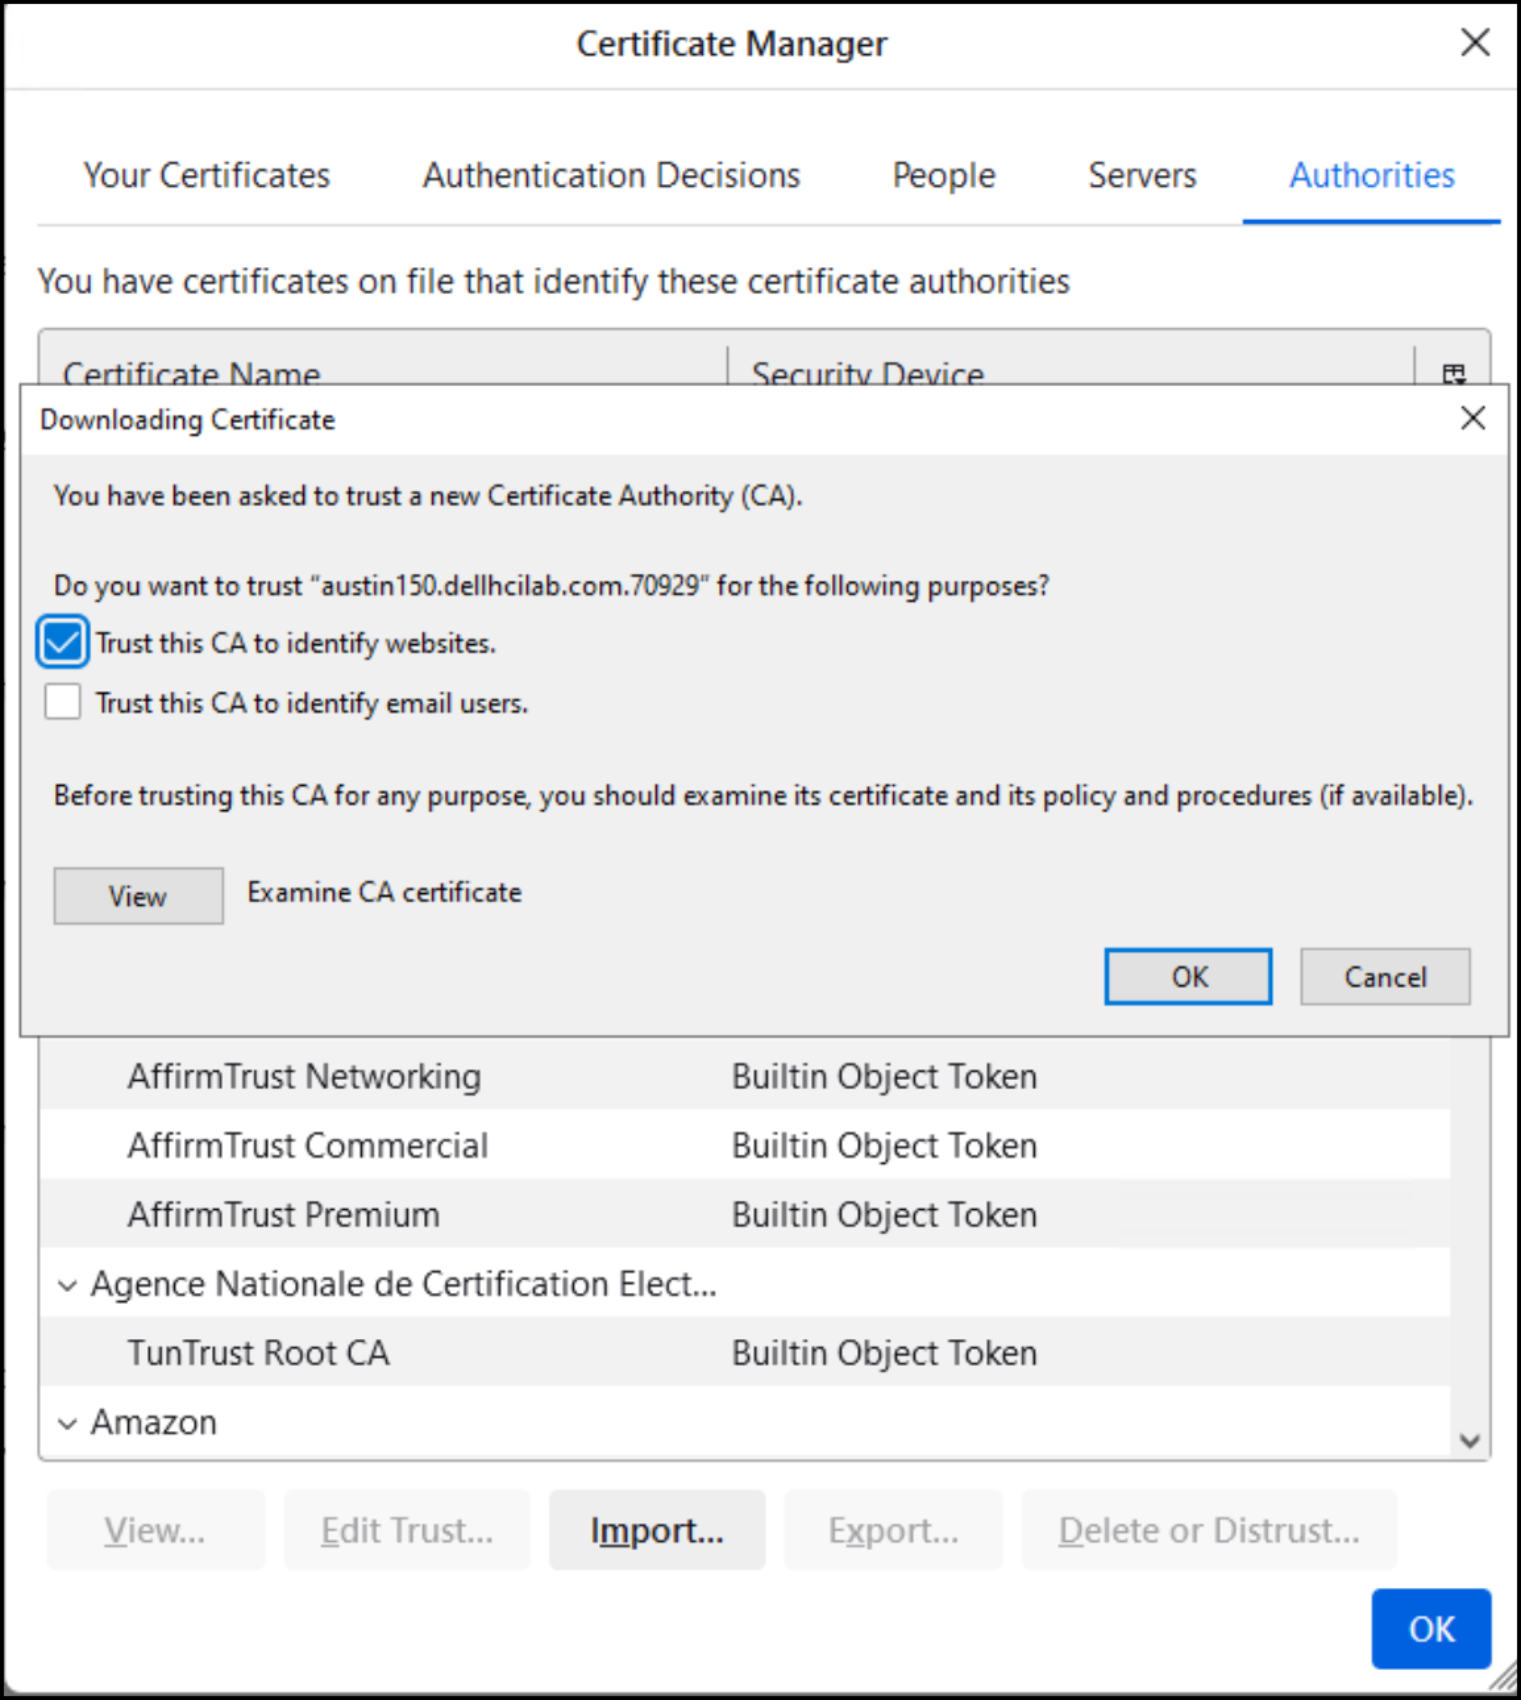 A screenshot showing the Browser Certificate Manager dialog box.